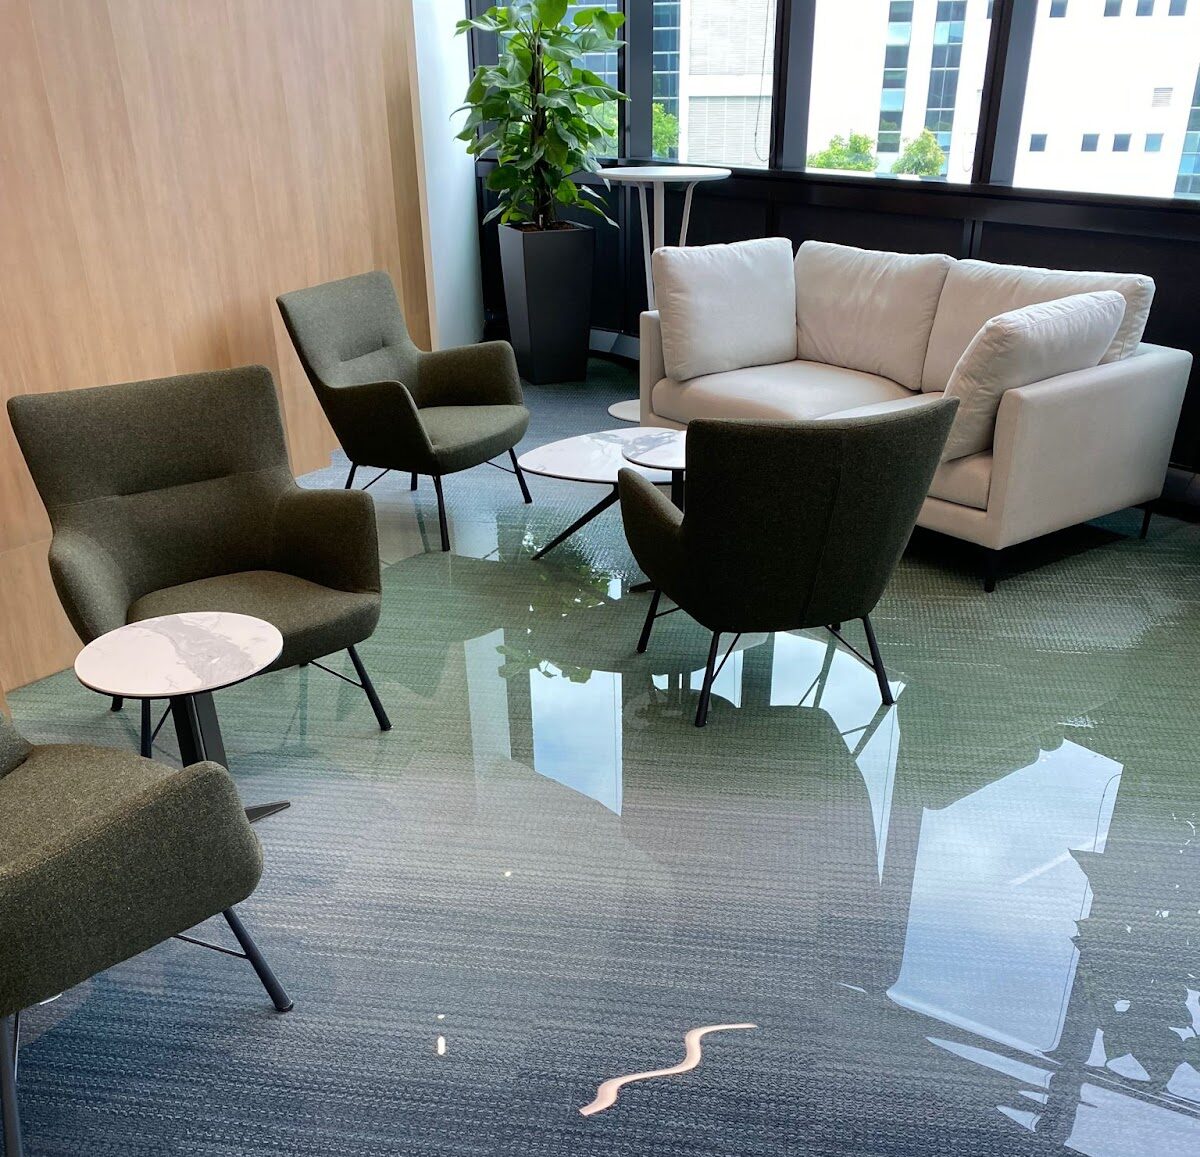 Flooding in a Commercial Office